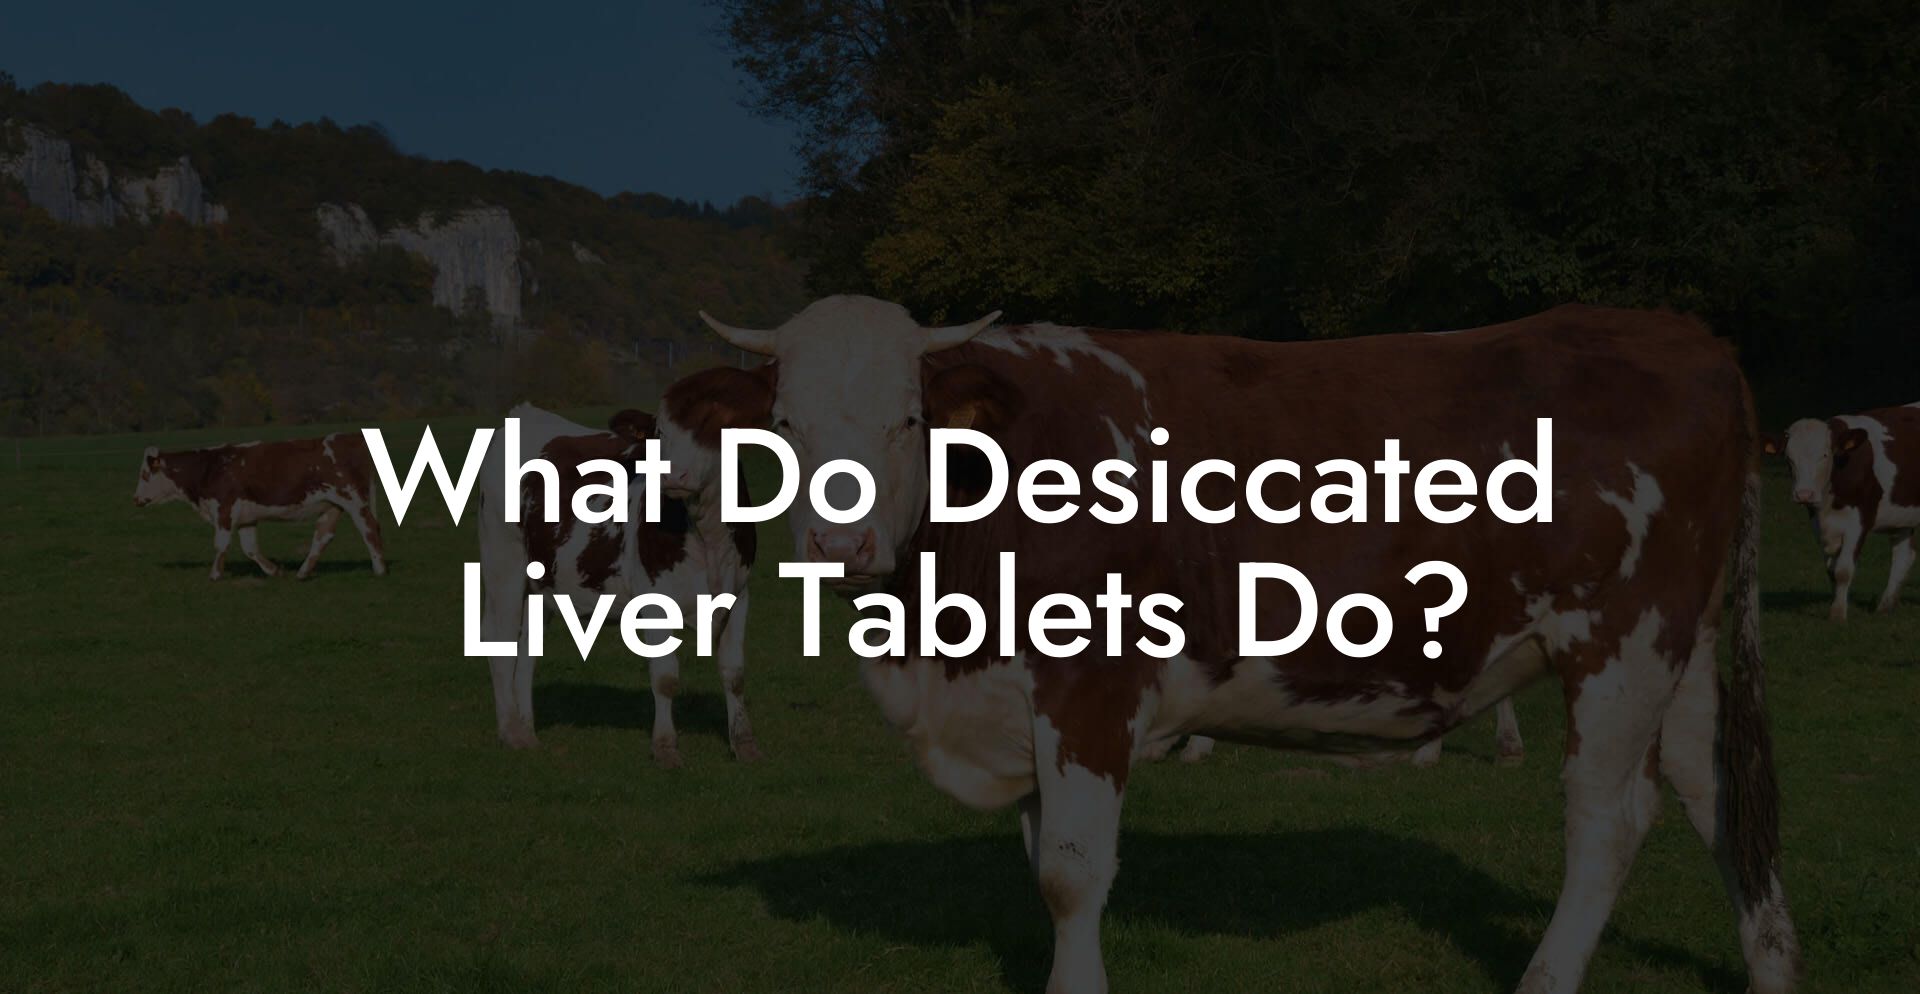 What Do Desiccated Liver Tablets Do?